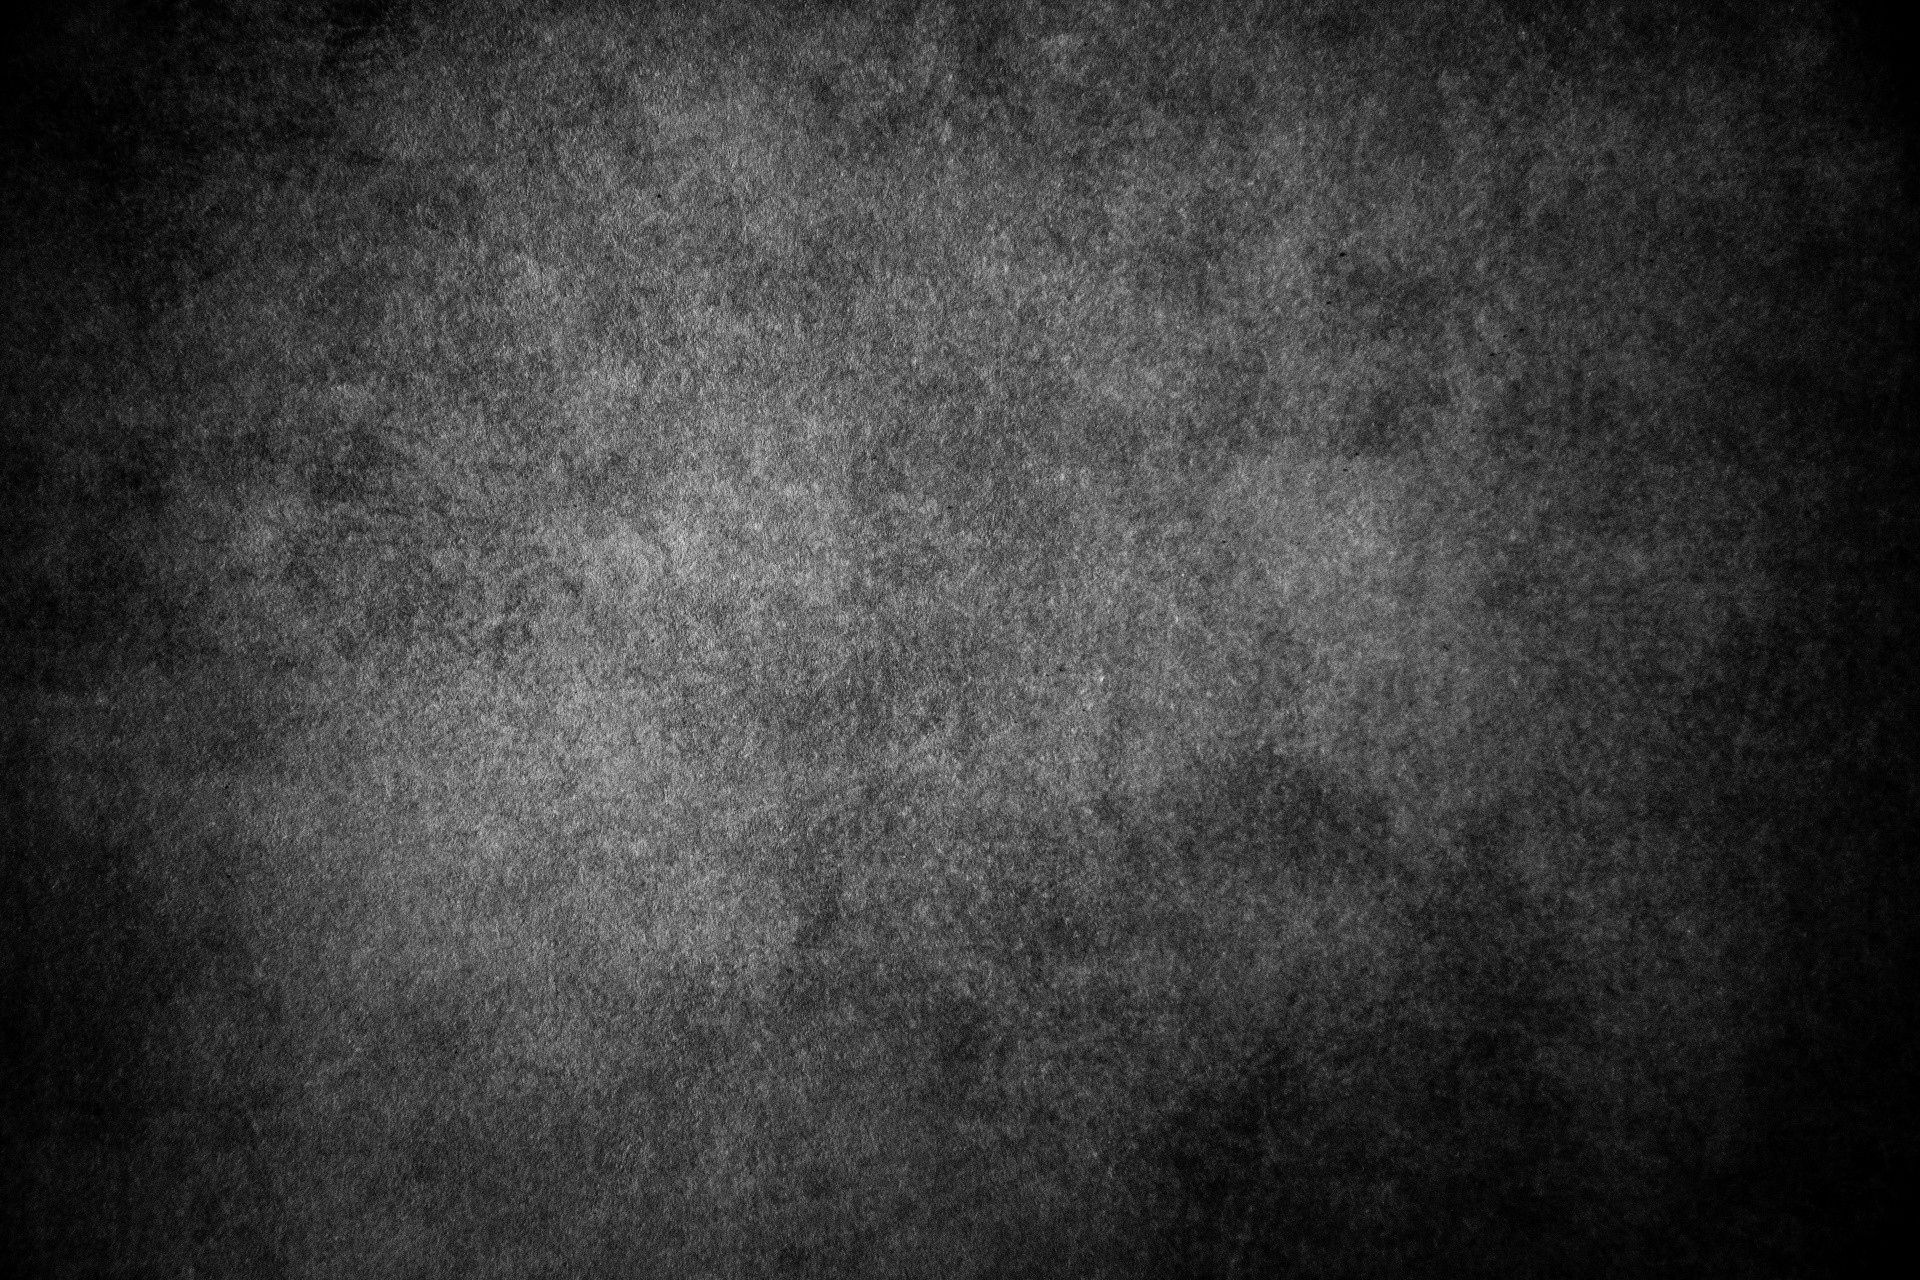 Black Grunge Wallpaper Inspirational Black Grunge BackgroundDownload Free Awesome HD Wallpaper for Desktop and Mobile Devices In Of the Day of The Hudson